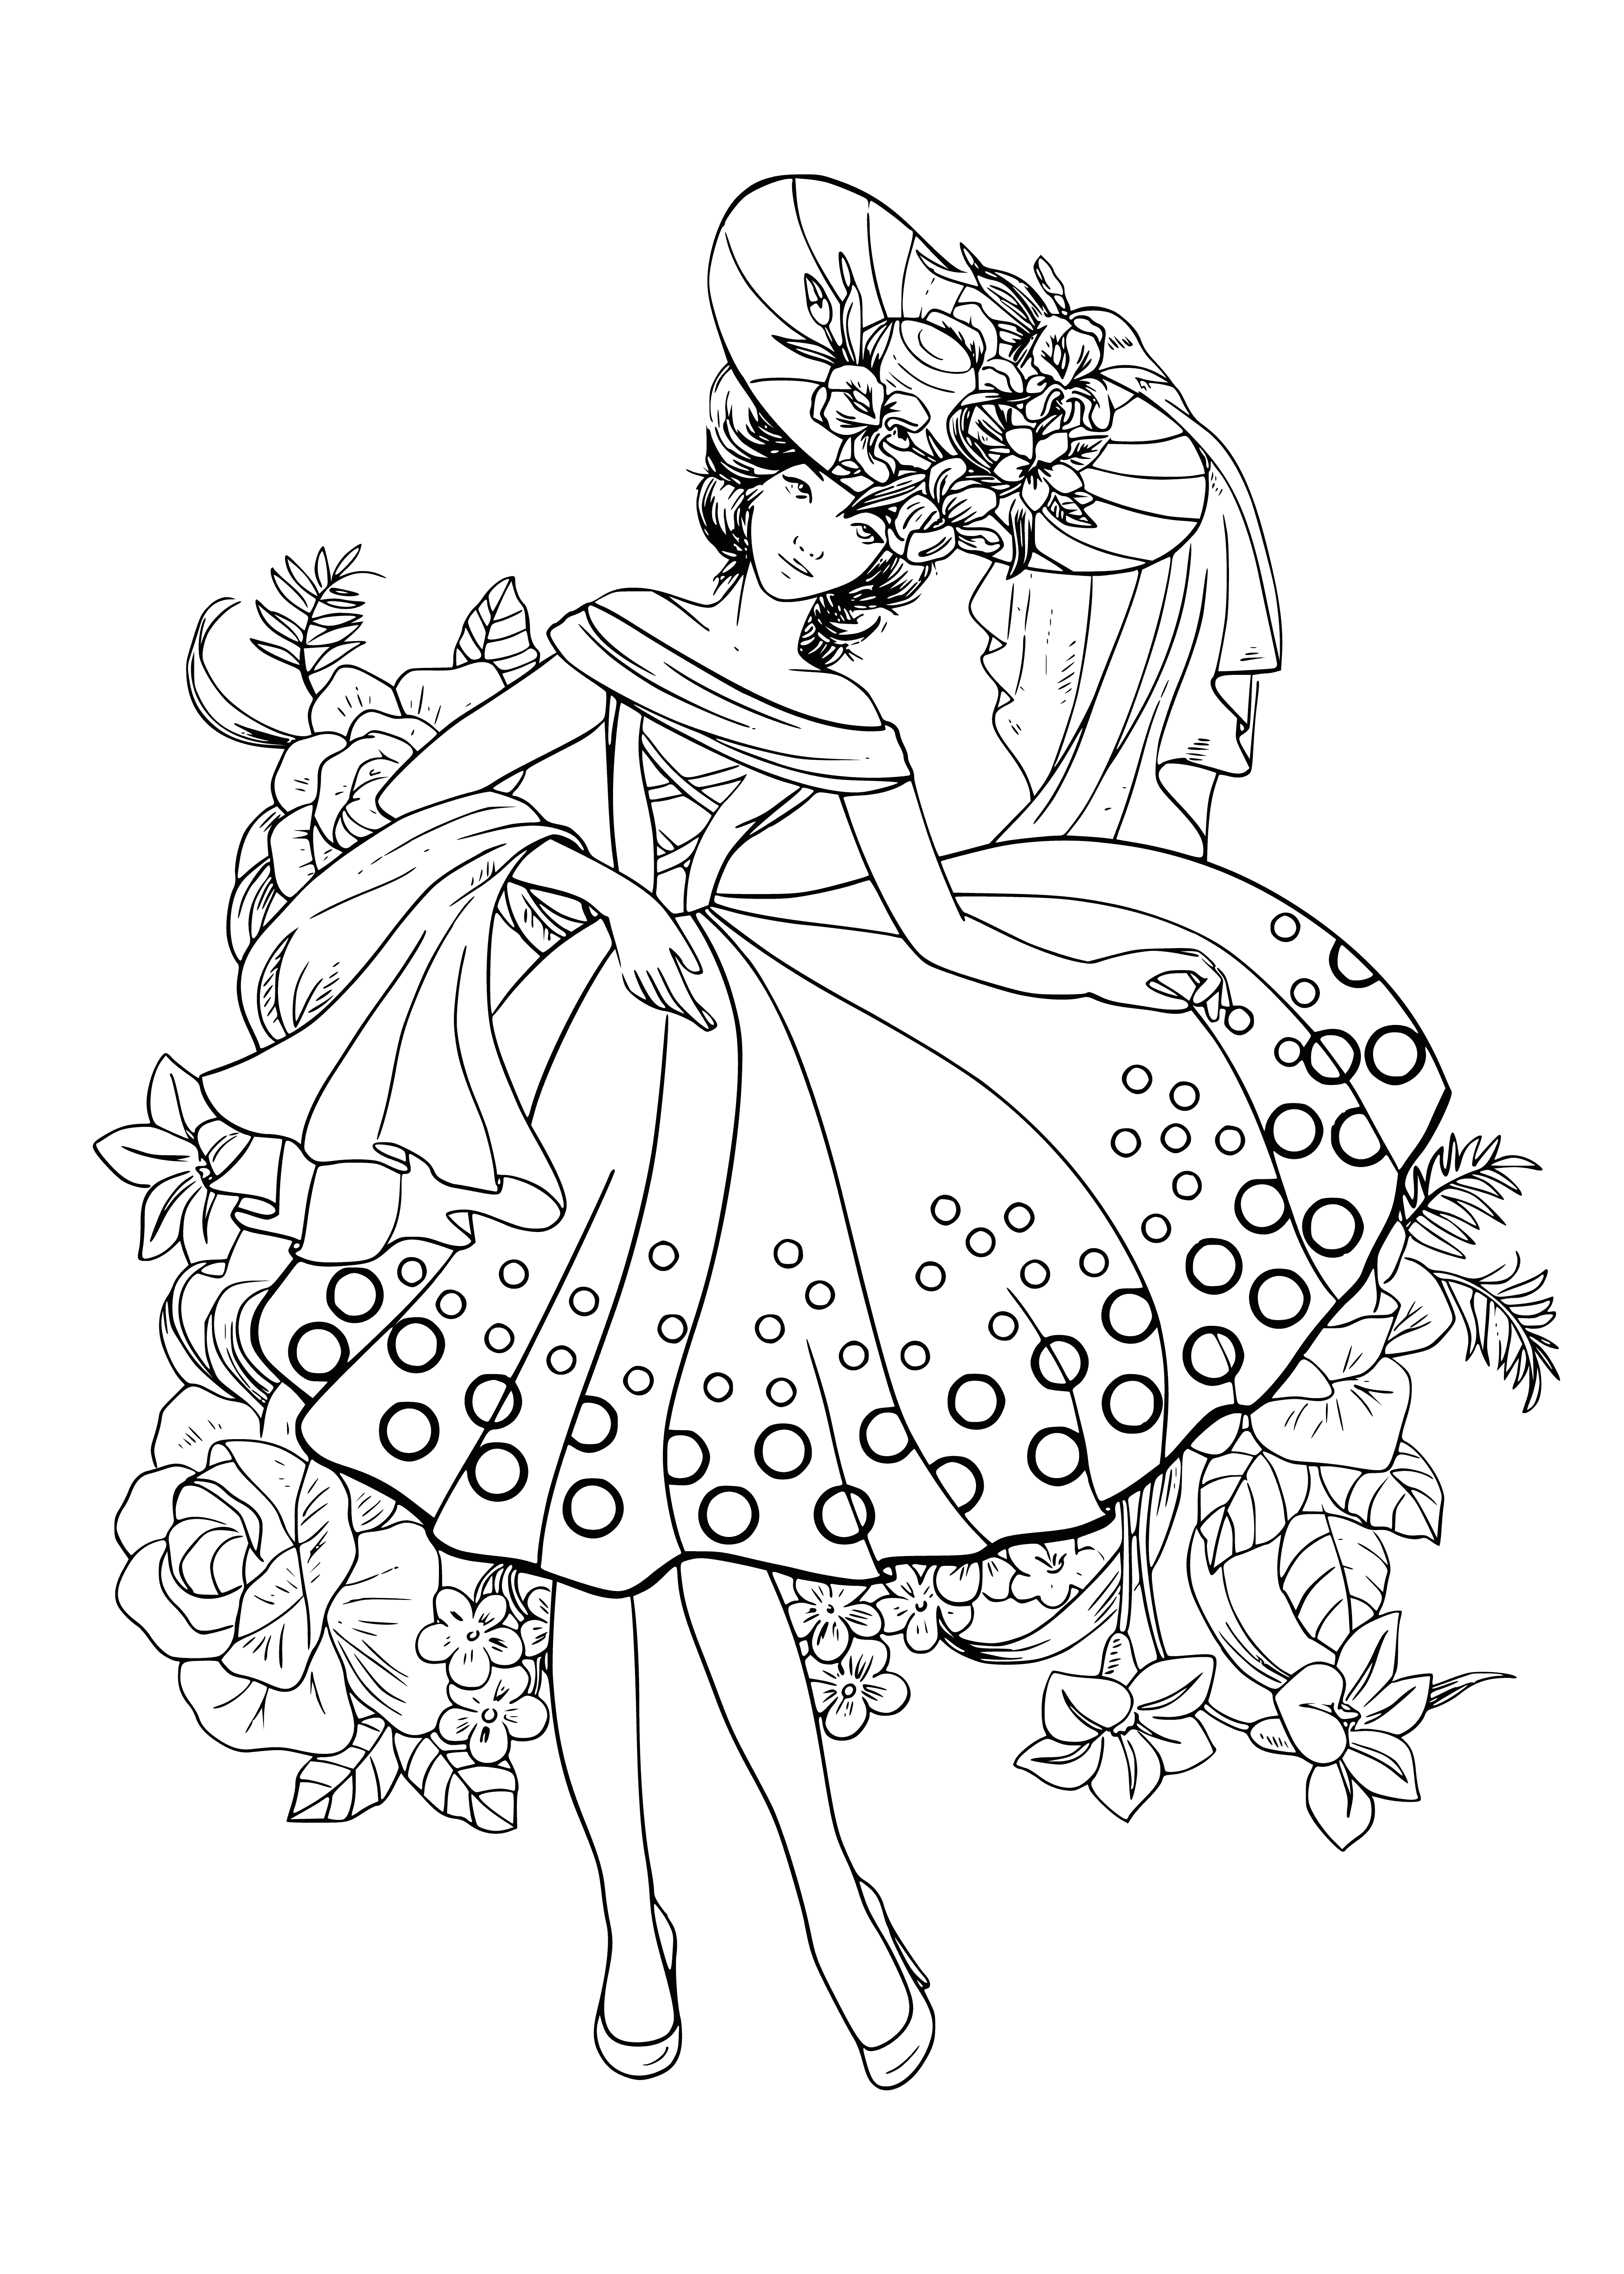 coloring page: Girl lost in thought, holding book & pencil - concentrating hard! #coloringpage #concentration